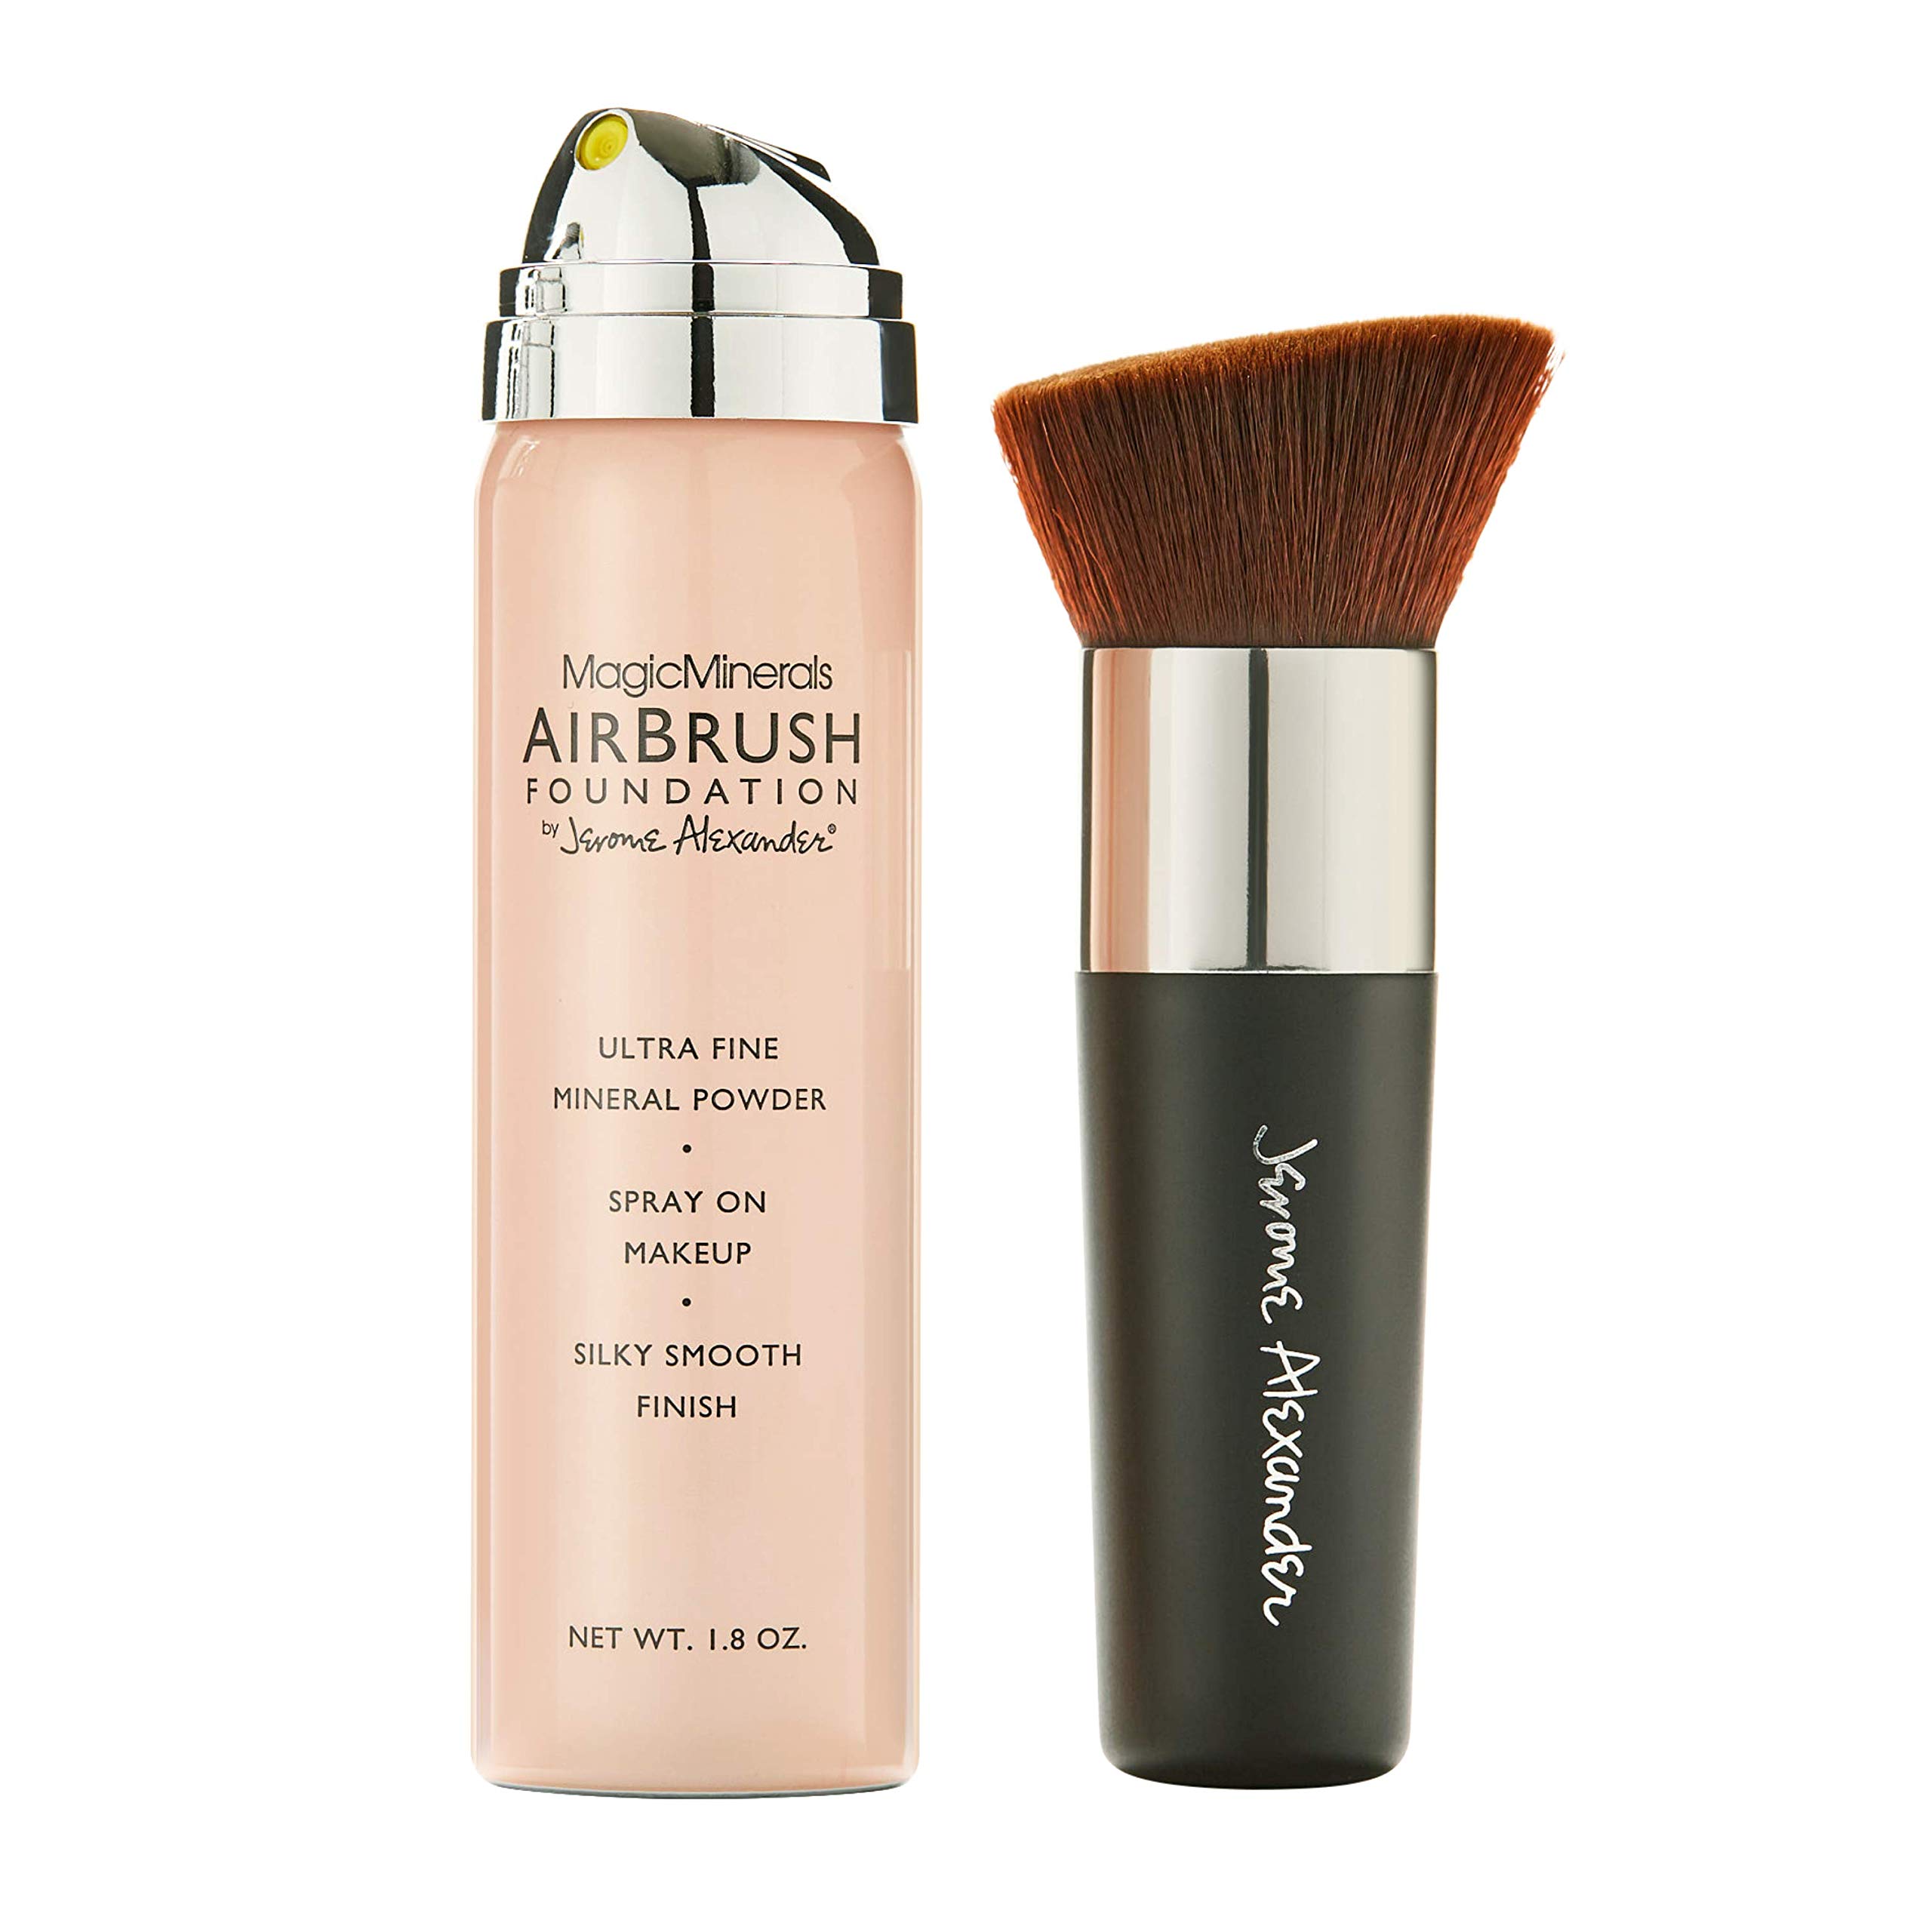 MagicMinerals AirBrush Foundation by Jerome Alexander 2pc Set with Airbrush  Foundation and Kabuki Brush - Spray Makeup